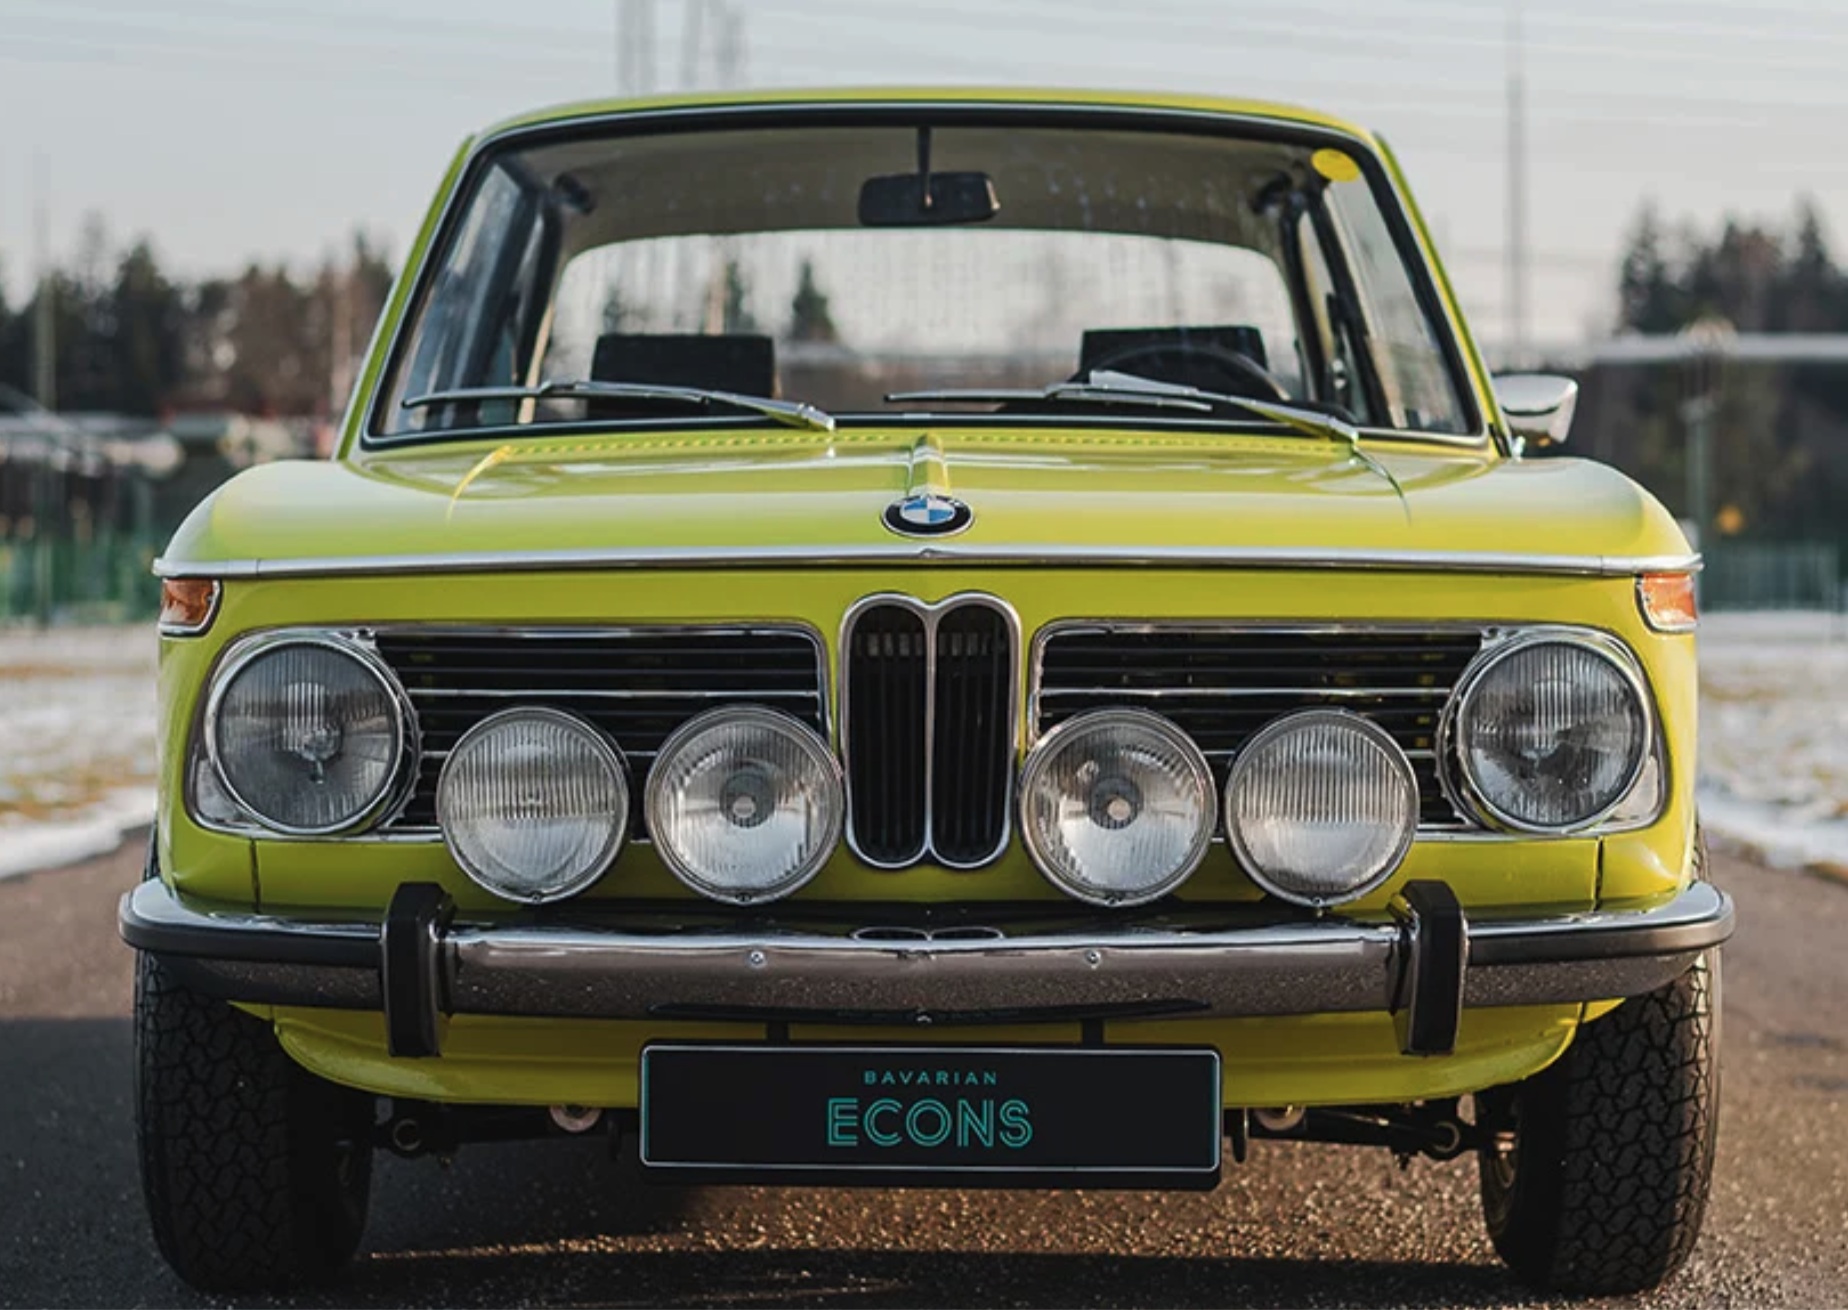 This Electrified BMW 2002 Costs a Shocking £230,000